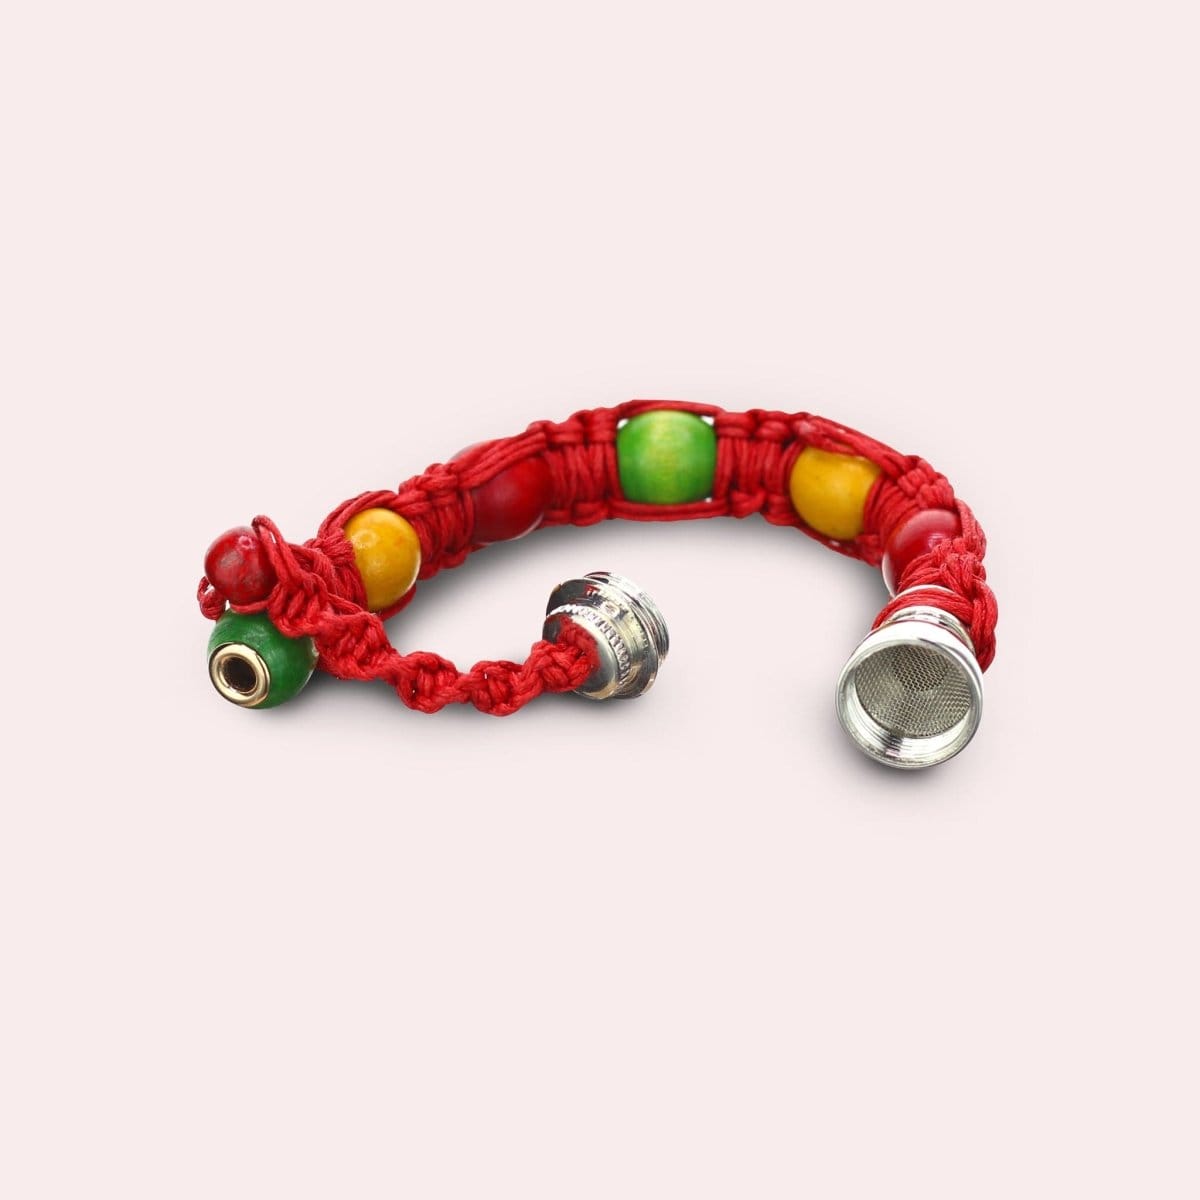 DHGate Accessory "The Danklet" Ankle Bracelet Pipe